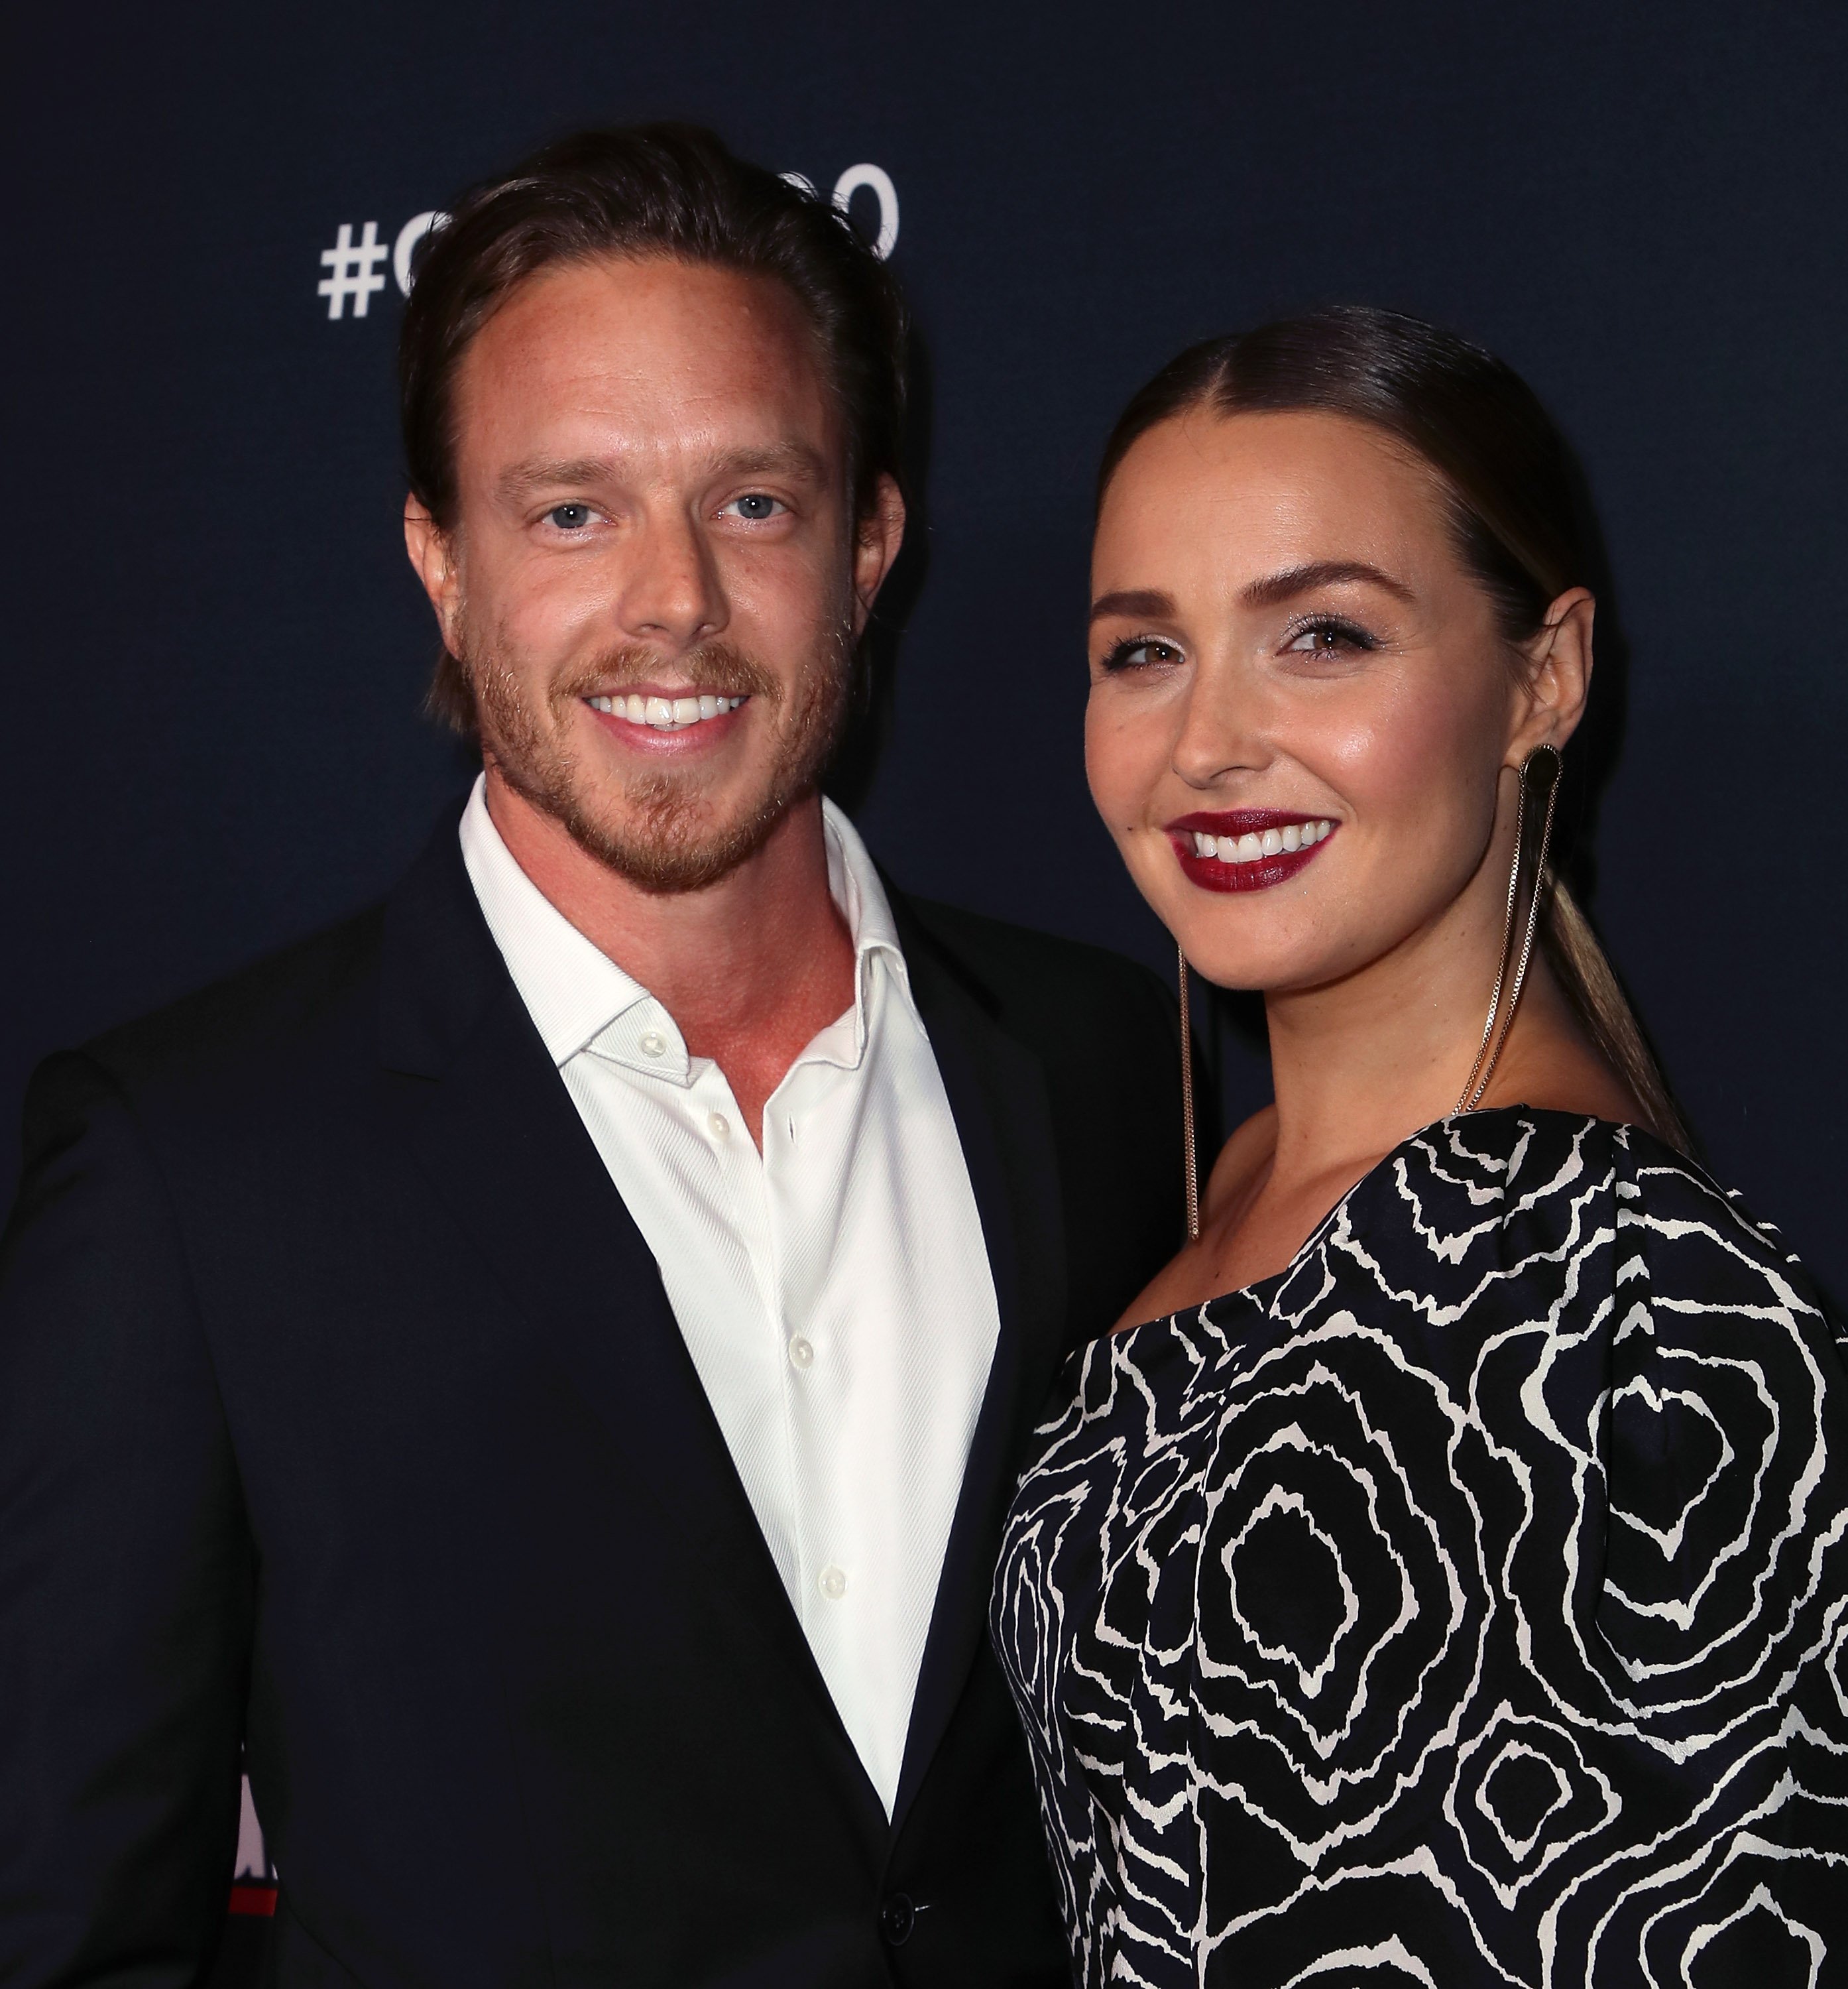 Matthew Alan and Camilla Luddington at the 300th episode celebration for ABC's "Grey's Anatomy" in 2017 in Los Angeles, California. | Source: Getty Images